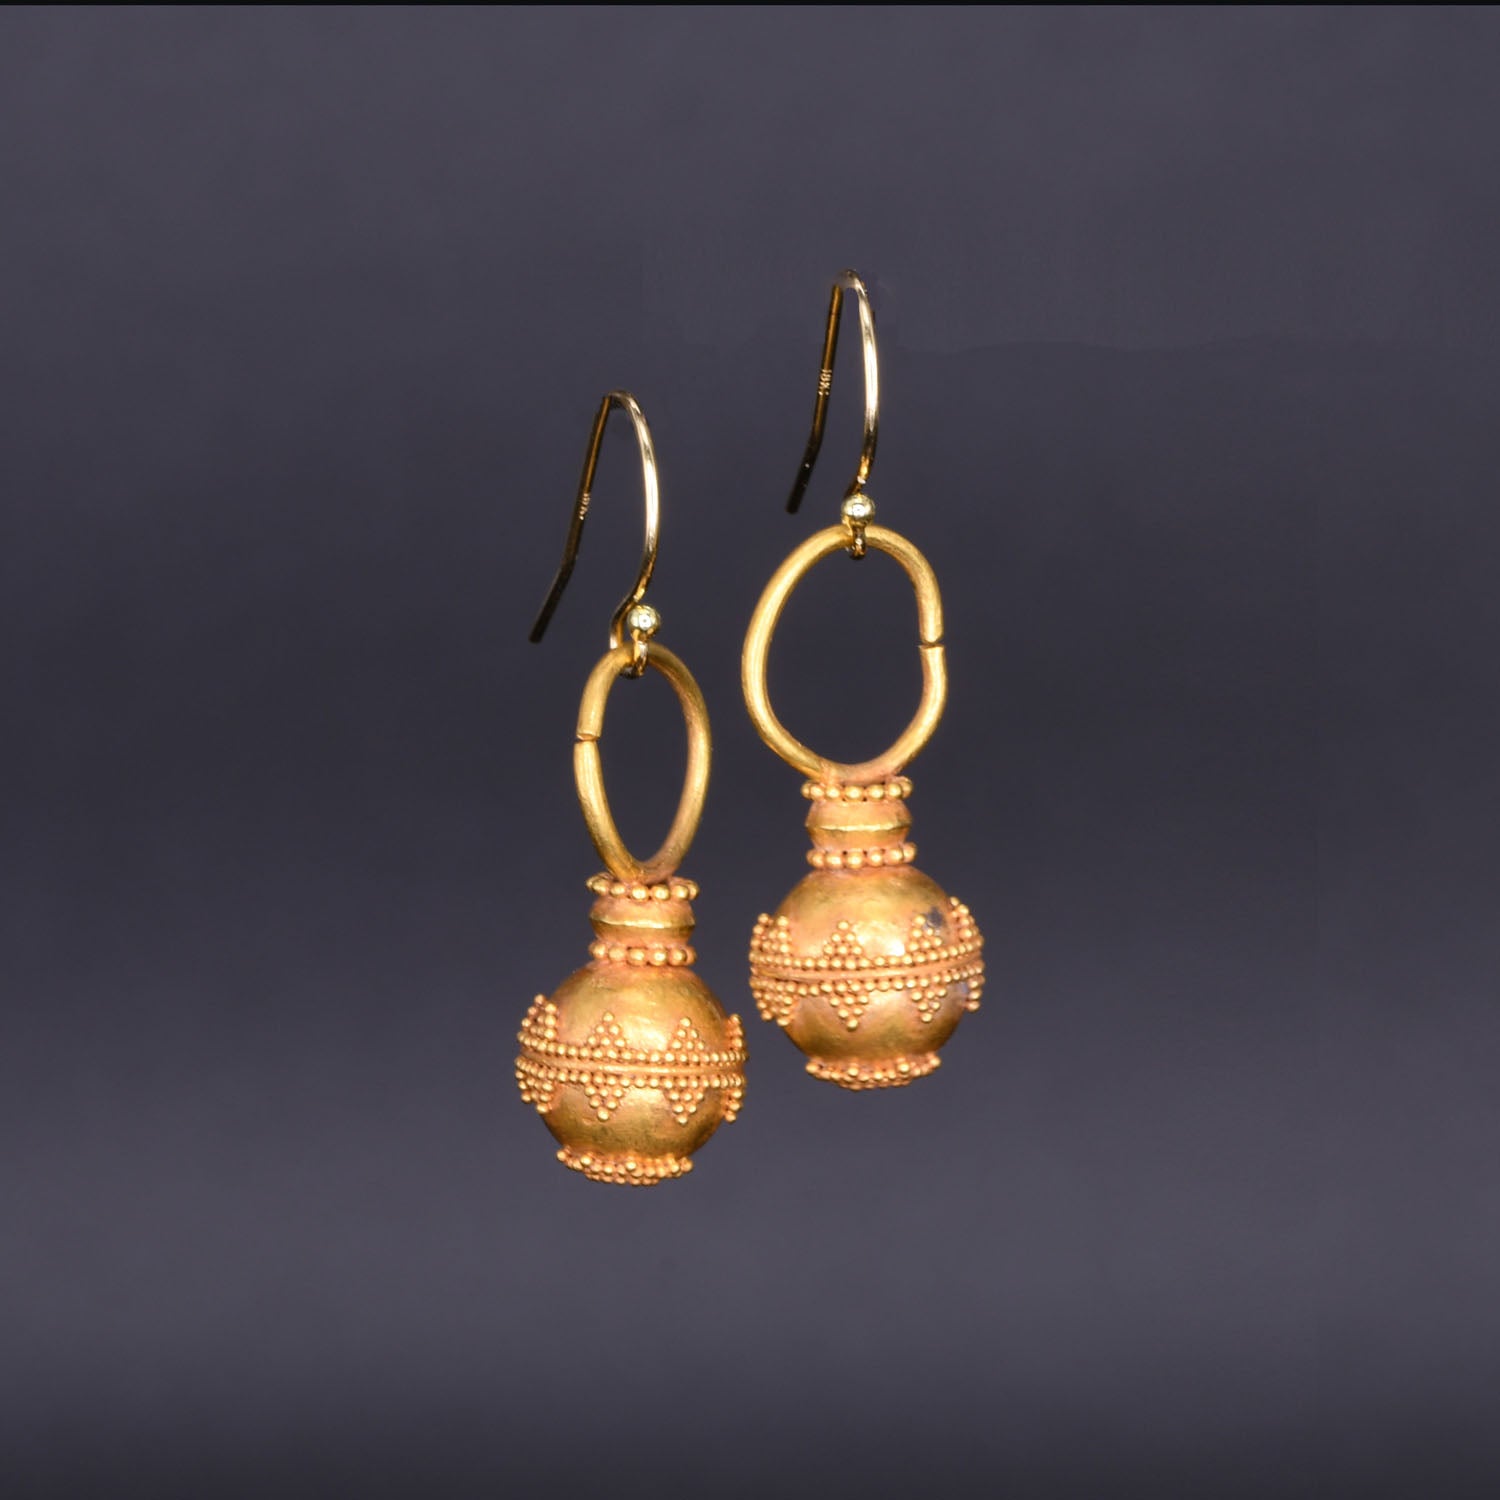 A Pair of Hellenistic Gold Drop Earrings, Hellenistic Period, ca. 3rd - 1st century BCE